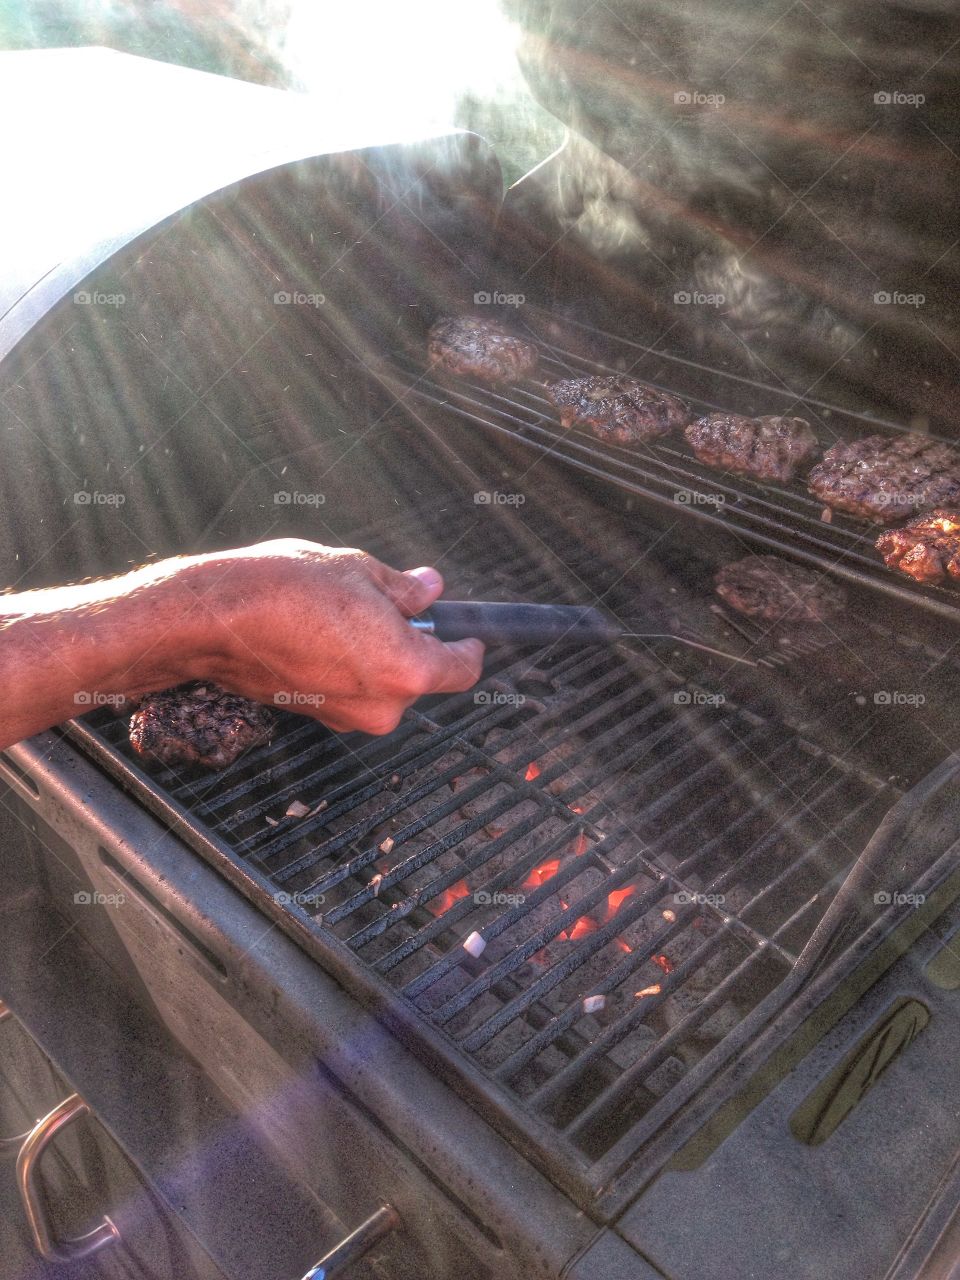 Flipping patties. Man flipping burgers on the grill